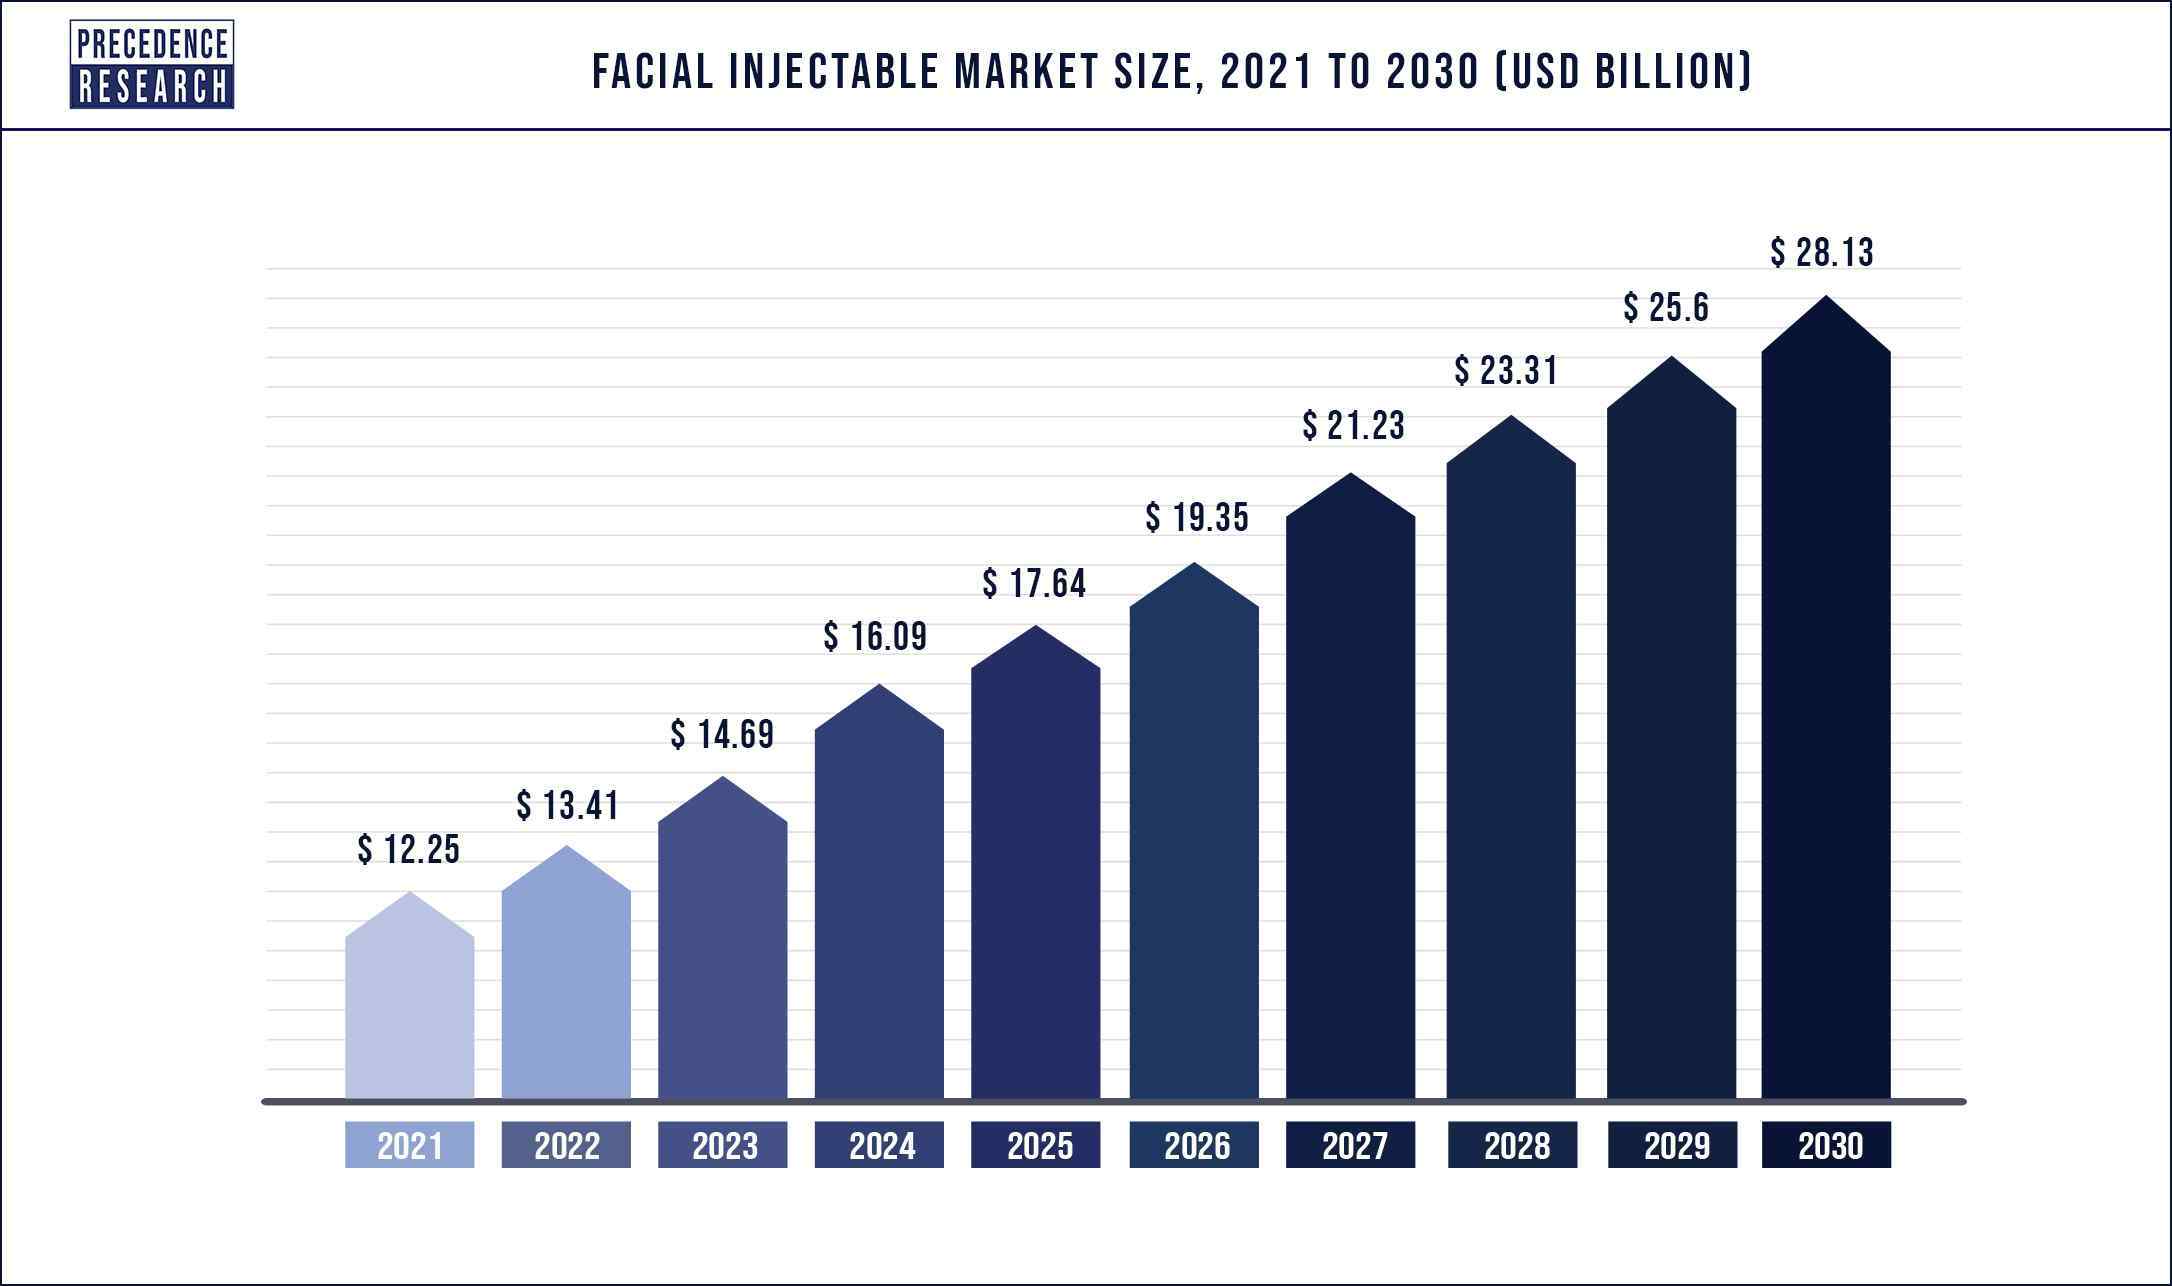 Facial Injectable Market Size 2022 to 2030